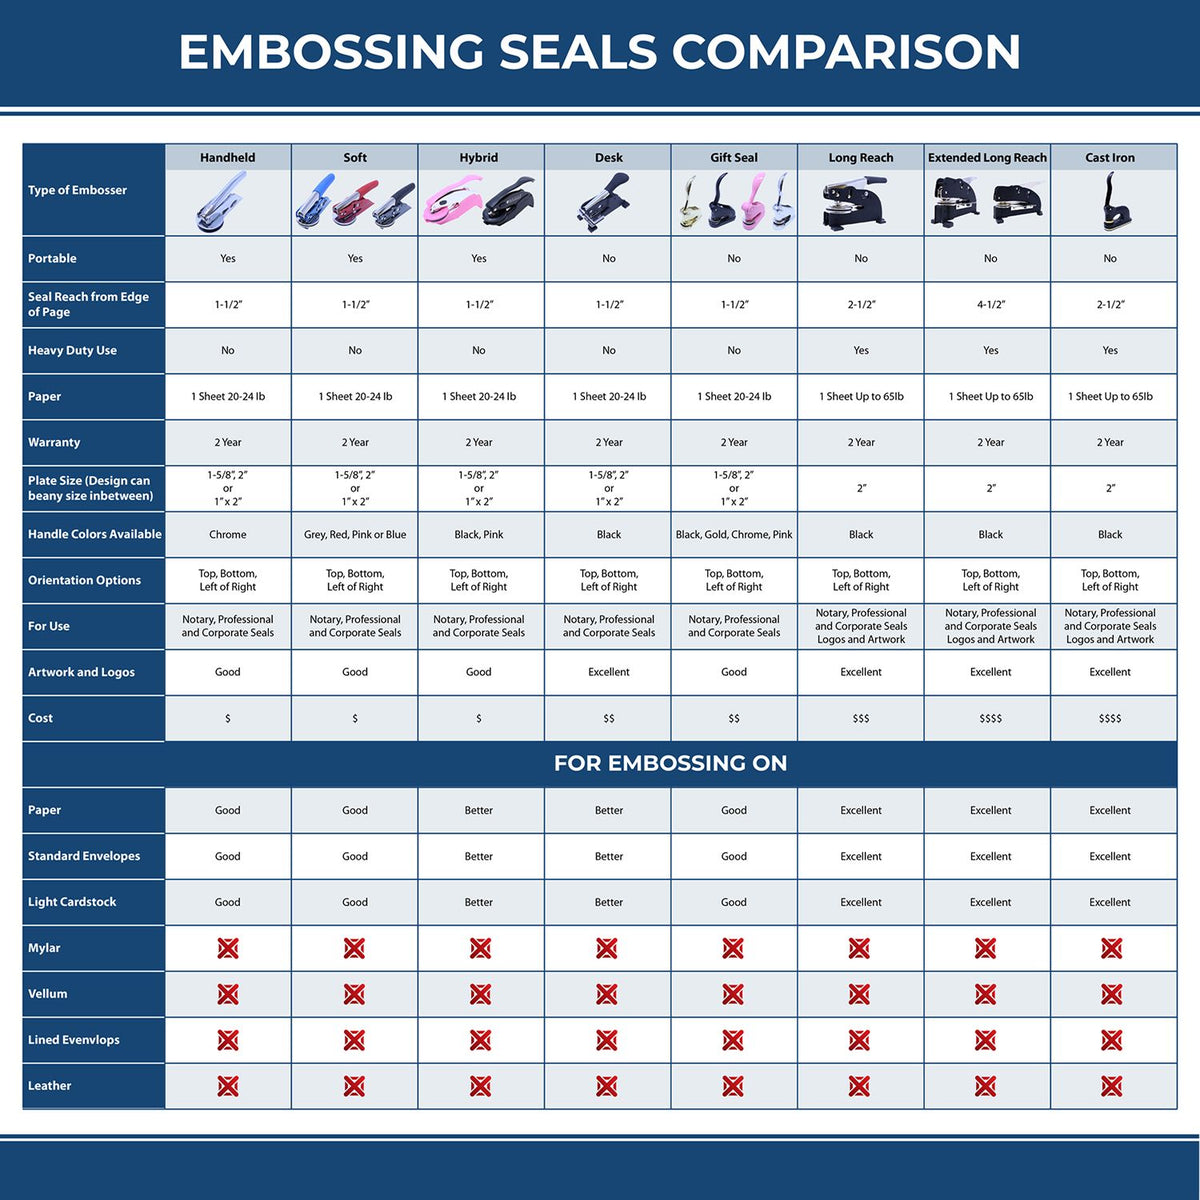 A comparison chart for the different types of mount models available for the Hawaii Engineer Desk Seal.